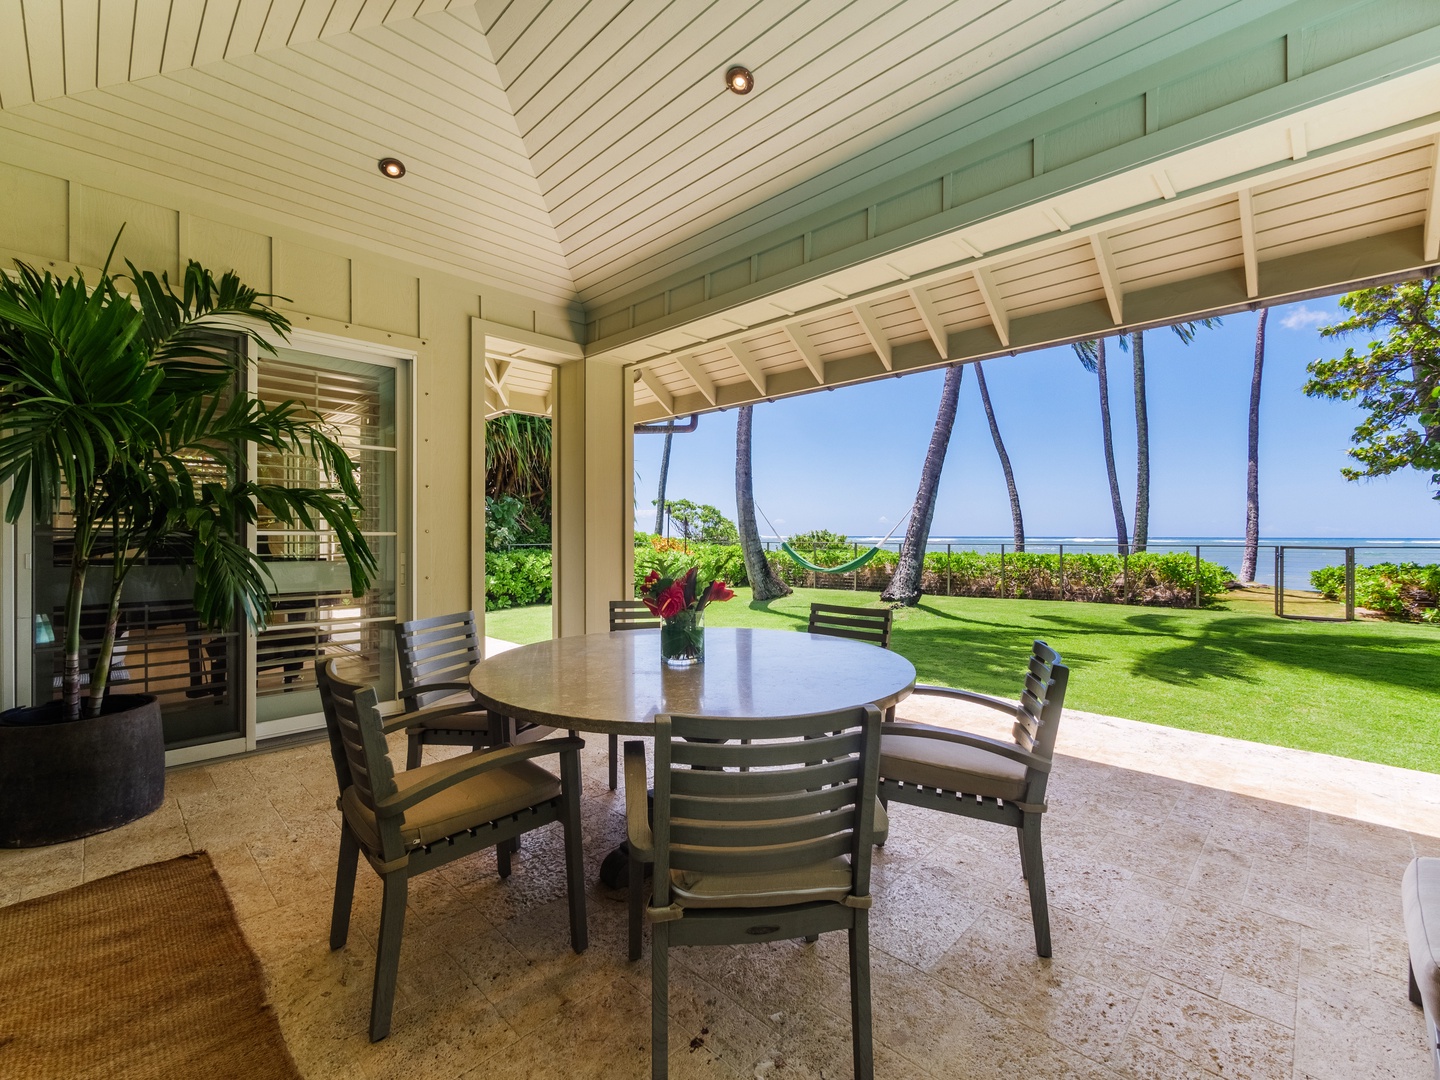 Honolulu Vacation Rentals, Paradise Beach Estate - Step onto the lanai and let the gentle ocean breeze caress your senses, offering a tranquil escape where land meets sea.